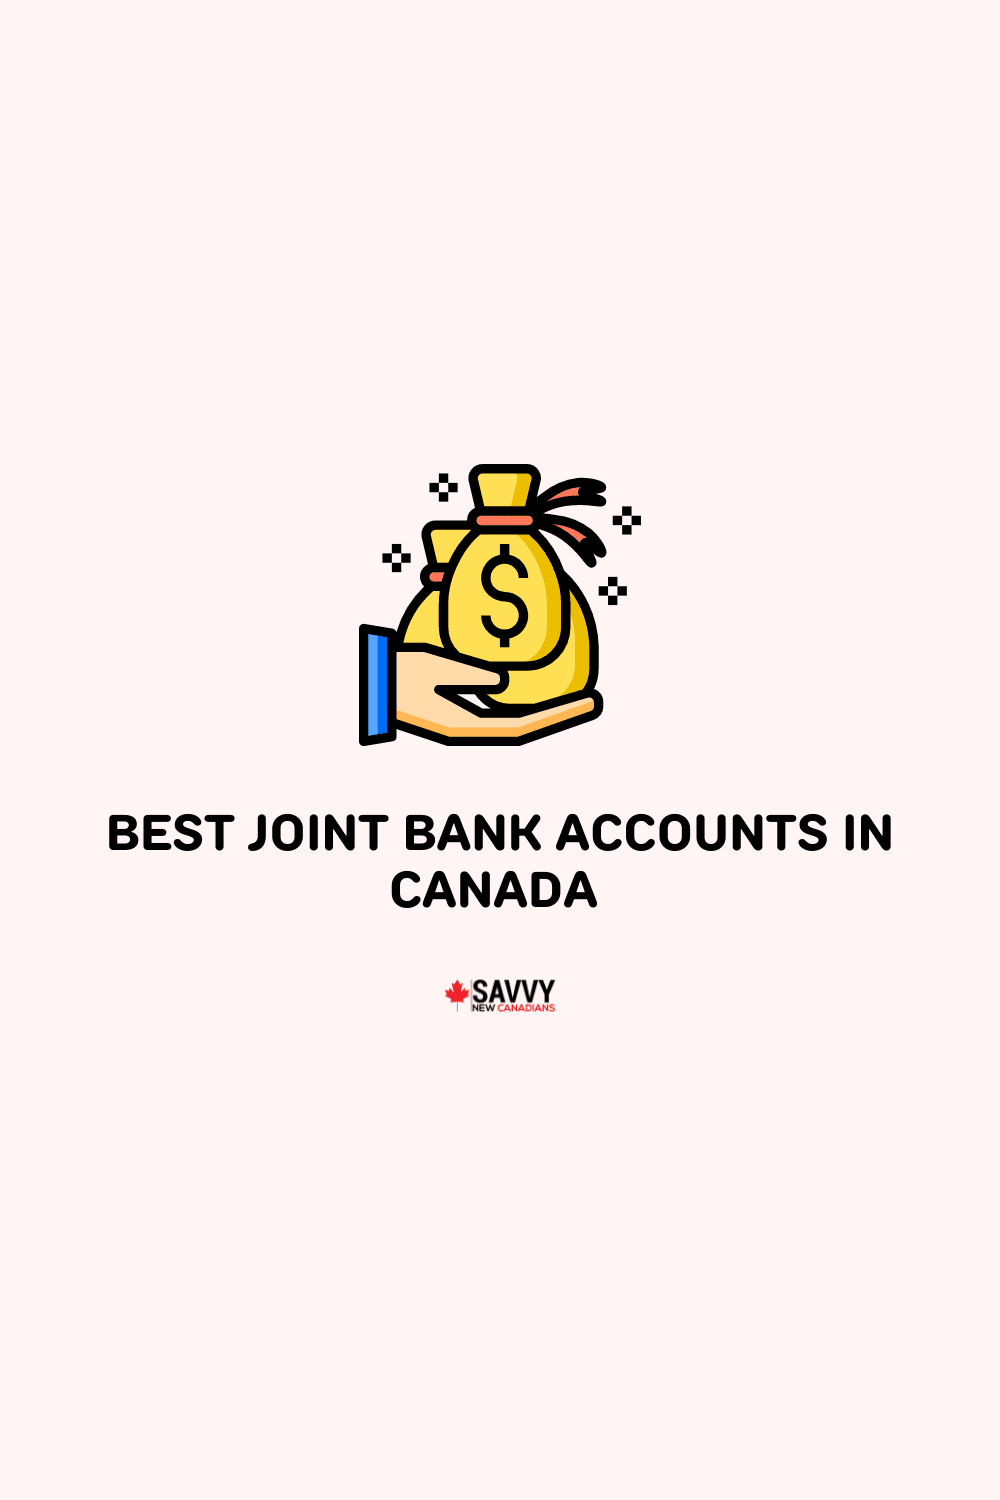 10 Best Joint Bank Accounts in Canada September 2022